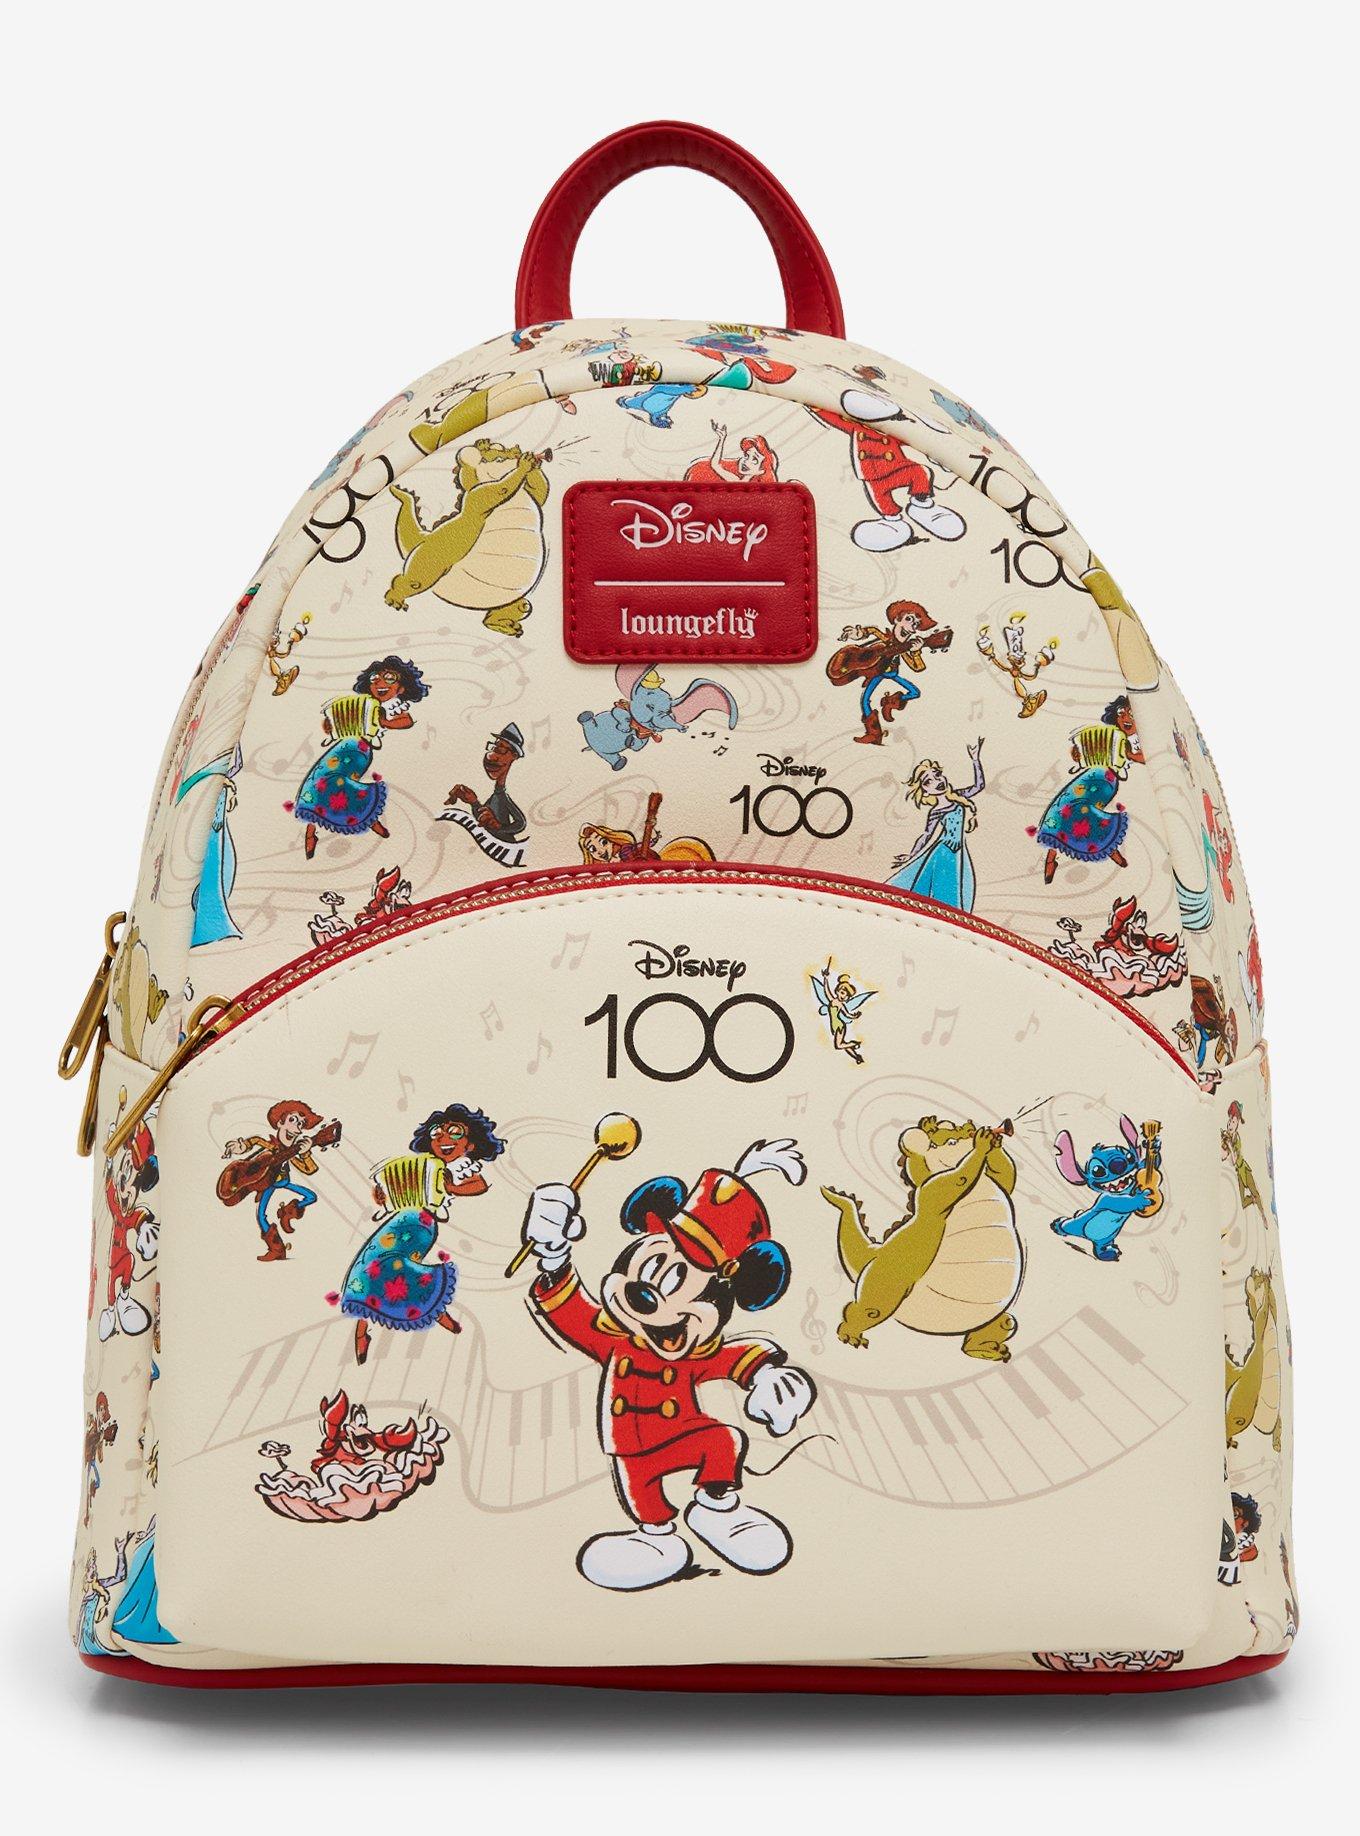 Loungefly Disney100 Mickey Mouse & Band Mini Backpack